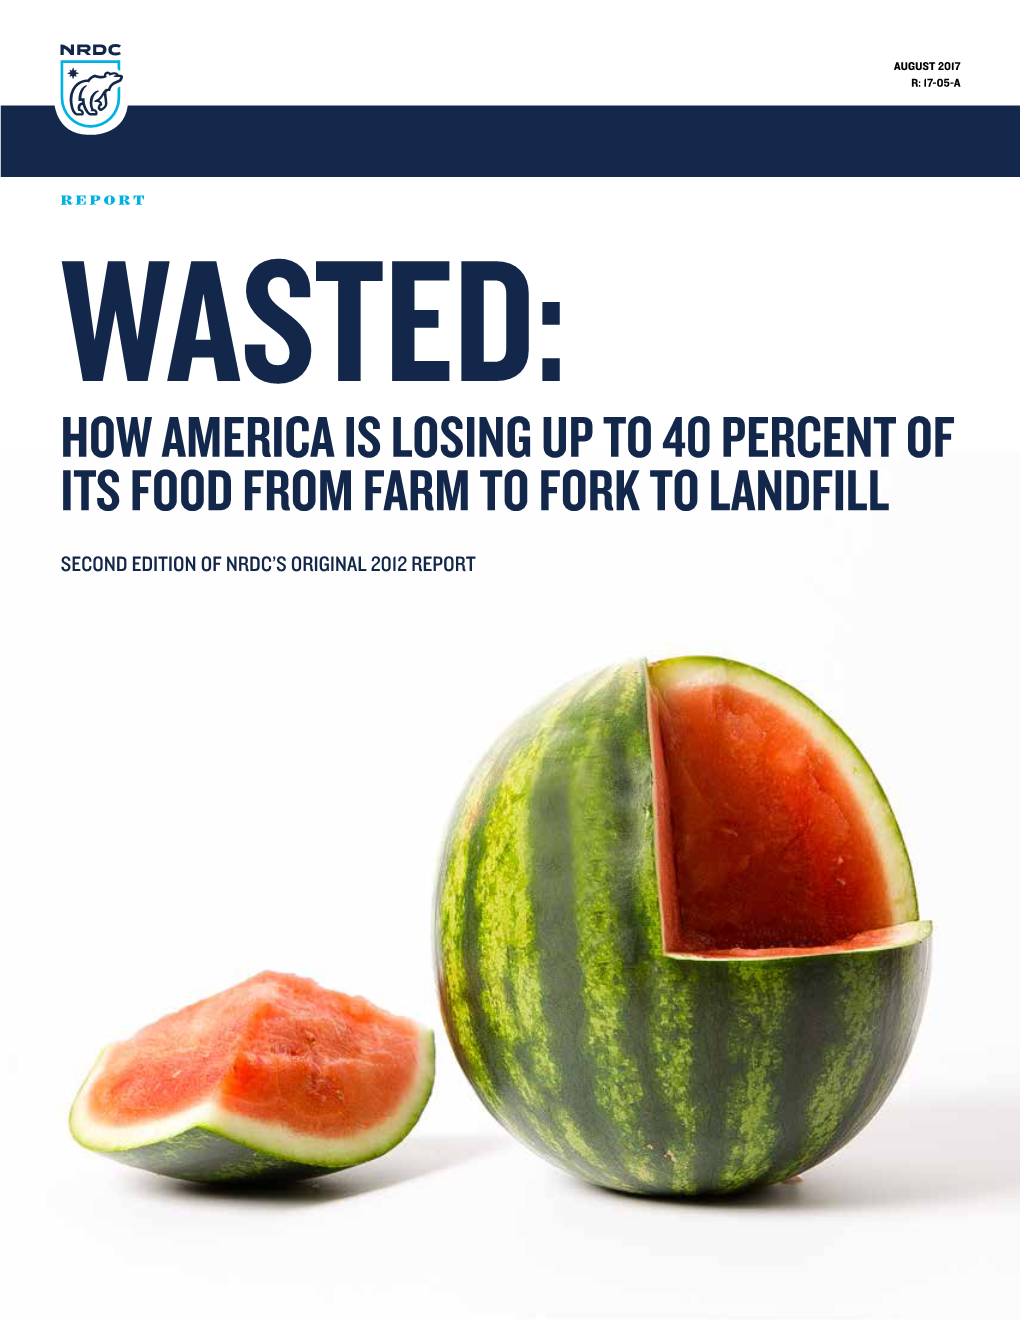 Wasted: How America Is Losing up to 40 Percent of Its Food from Farm to Fork to Landfill